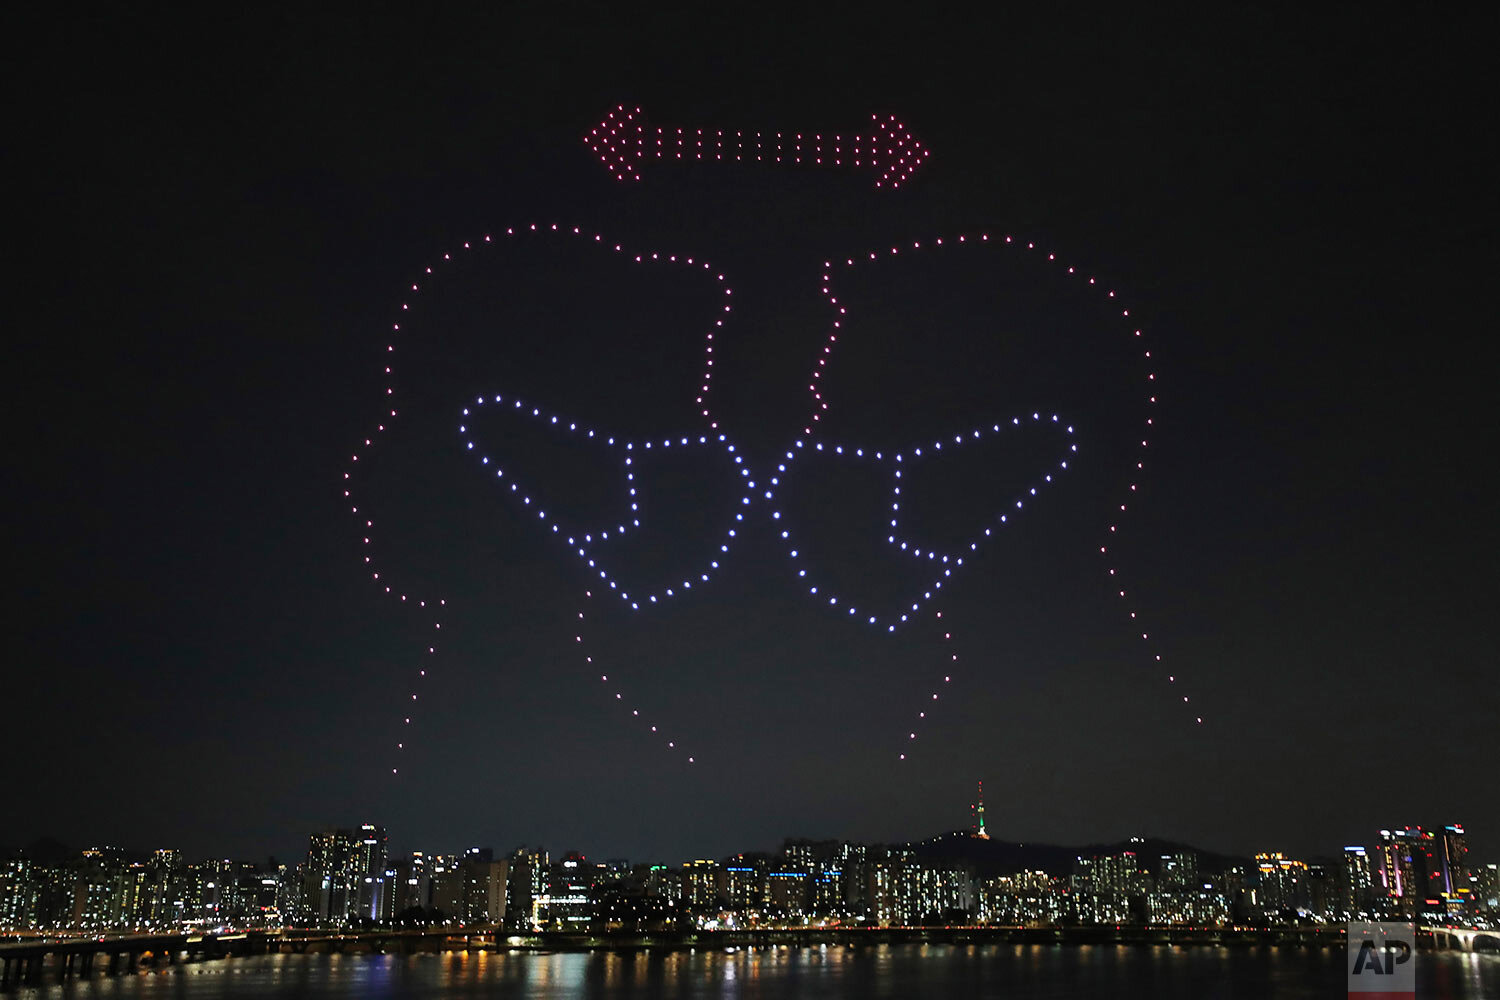  Some 400 drones fly over the Han River showing messages of appreciation for medical workers during the coronavirus pandemic in Seoul, South Korea on Saturday, July 4, 2020. (Lim Hwa-young/Yonhap via AP) 